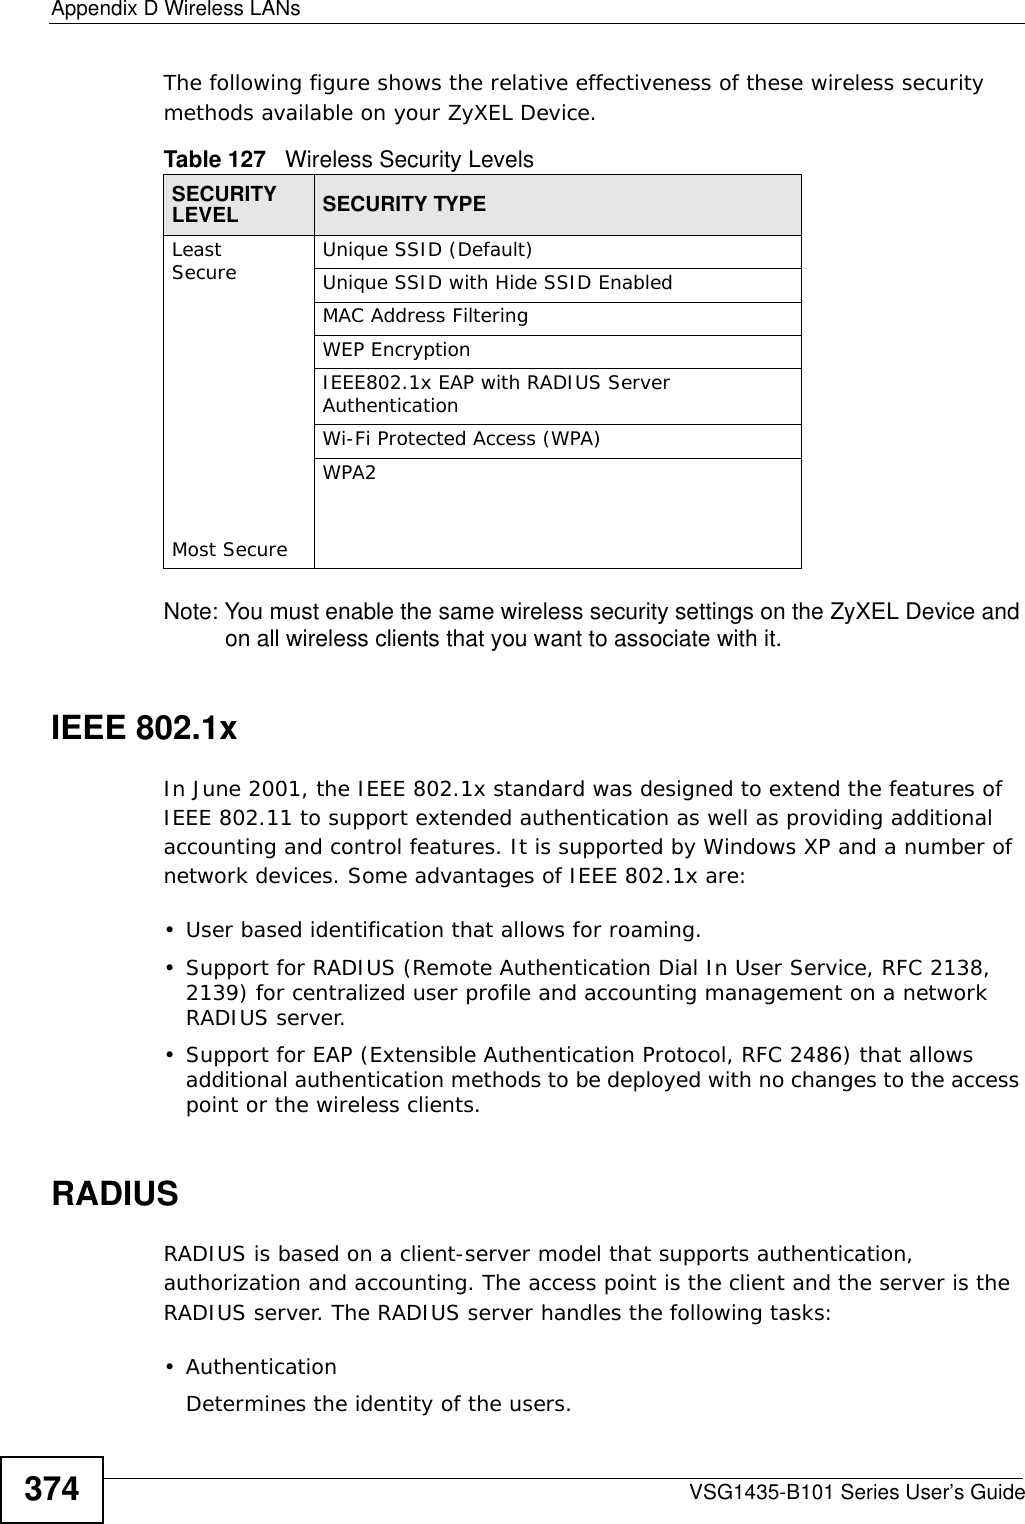 Appendix D Wireless LANsVSG1435-B101 Series User’s Guide374The following figure shows the relative effectiveness of these wireless security methods available on your ZyXEL Device.Note: You must enable the same wireless security settings on the ZyXEL Device and on all wireless clients that you want to associate with it. IEEE 802.1xIn June 2001, the IEEE 802.1x standard was designed to extend the features of IEEE 802.11 to support extended authentication as well as providing additional accounting and control features. It is supported by Windows XP and a number of network devices. Some advantages of IEEE 802.1x are:• User based identification that allows for roaming.• Support for RADIUS (Remote Authentication Dial In User Service, RFC 2138, 2139) for centralized user profile and accounting management on a network RADIUS server. • Support for EAP (Extensible Authentication Protocol, RFC 2486) that allows additional authentication methods to be deployed with no changes to the access point or the wireless clients. RADIUSRADIUS is based on a client-server model that supports authentication, authorization and accounting. The access point is the client and the server is the RADIUS server. The RADIUS server handles the following tasks:• Authentication Determines the identity of the users.Table 127   Wireless Security LevelsSECURITY LEVEL SECURITY TYPELeast       Secure                                                                                  Most SecureUnique SSID (Default)Unique SSID with Hide SSID EnabledMAC Address FilteringWEP EncryptionIEEE802.1x EAP with RADIUS Server AuthenticationWi-Fi Protected Access (WPA)WPA2